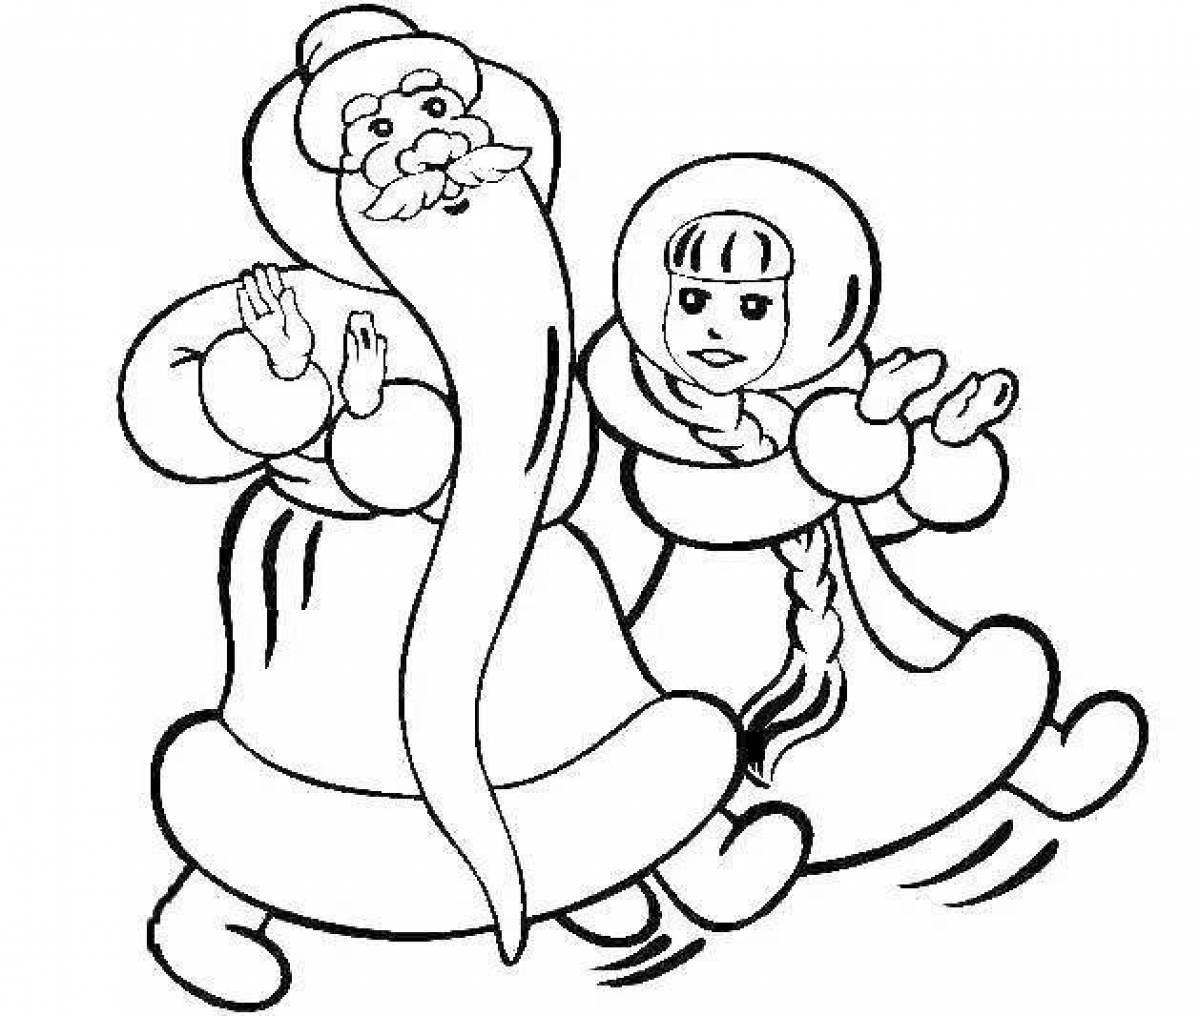 Inviting coloring book Santa Claus and the Snow Maiden